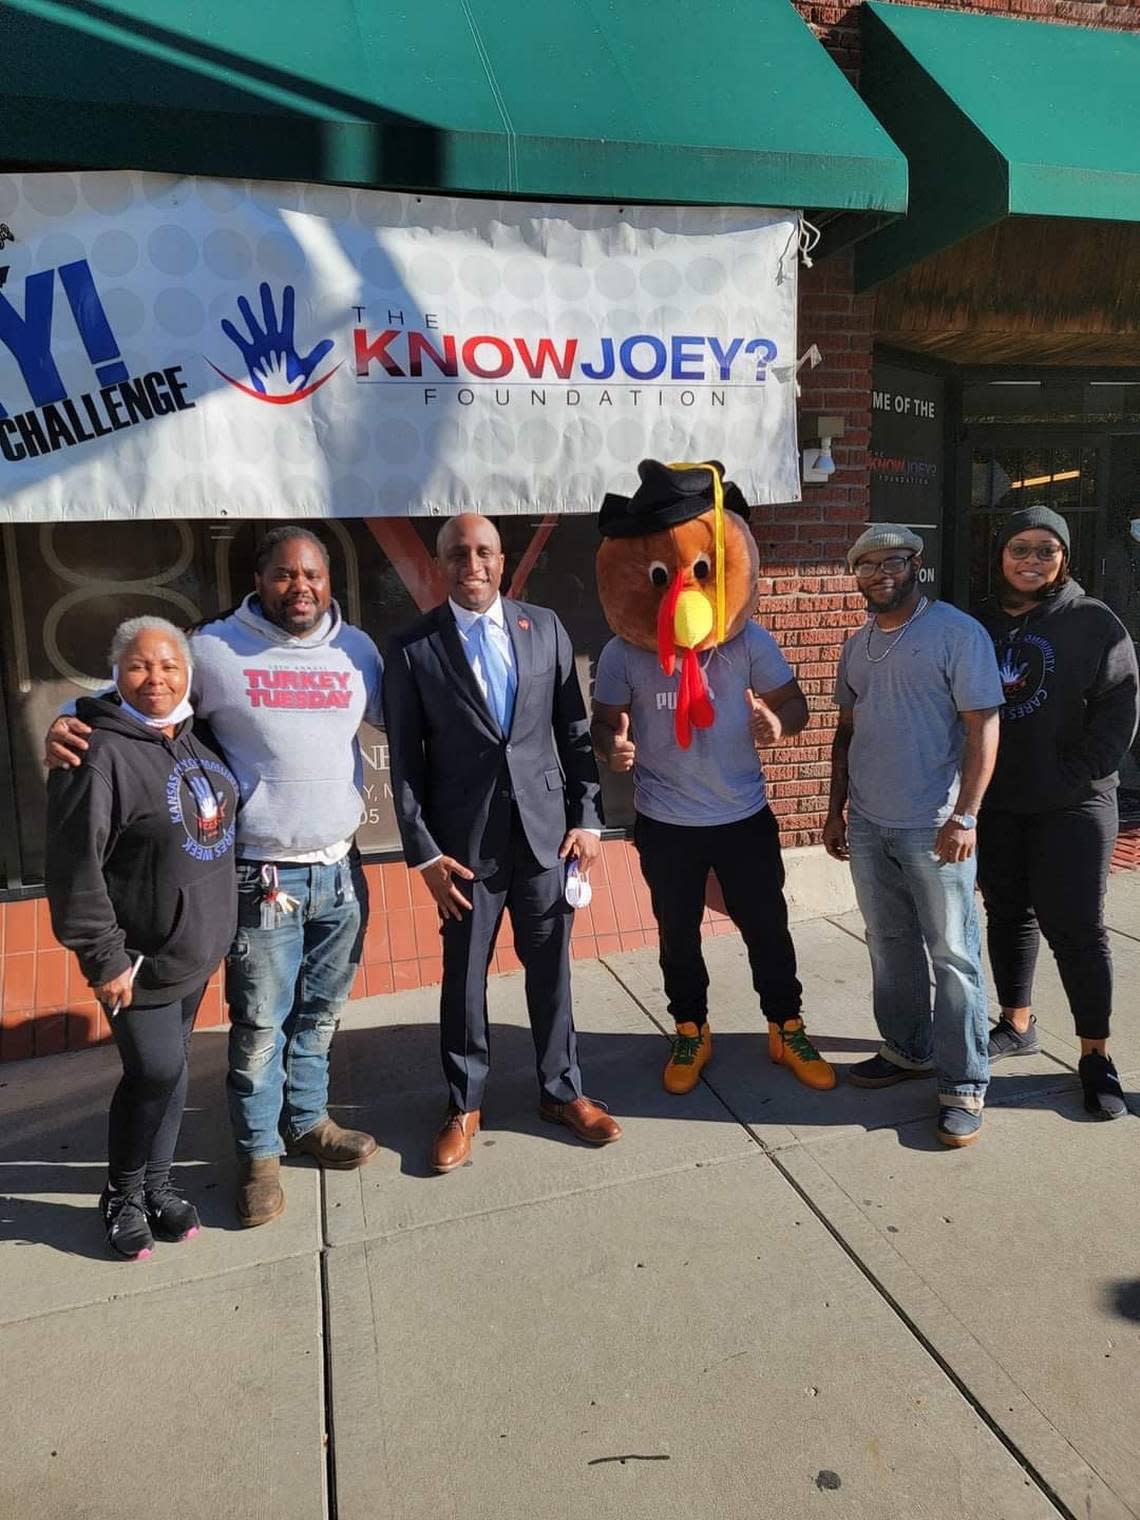 Mayor Quinton Lucas, third from left, showed his support at last year’s drive along with the Know Joey Foundation team.